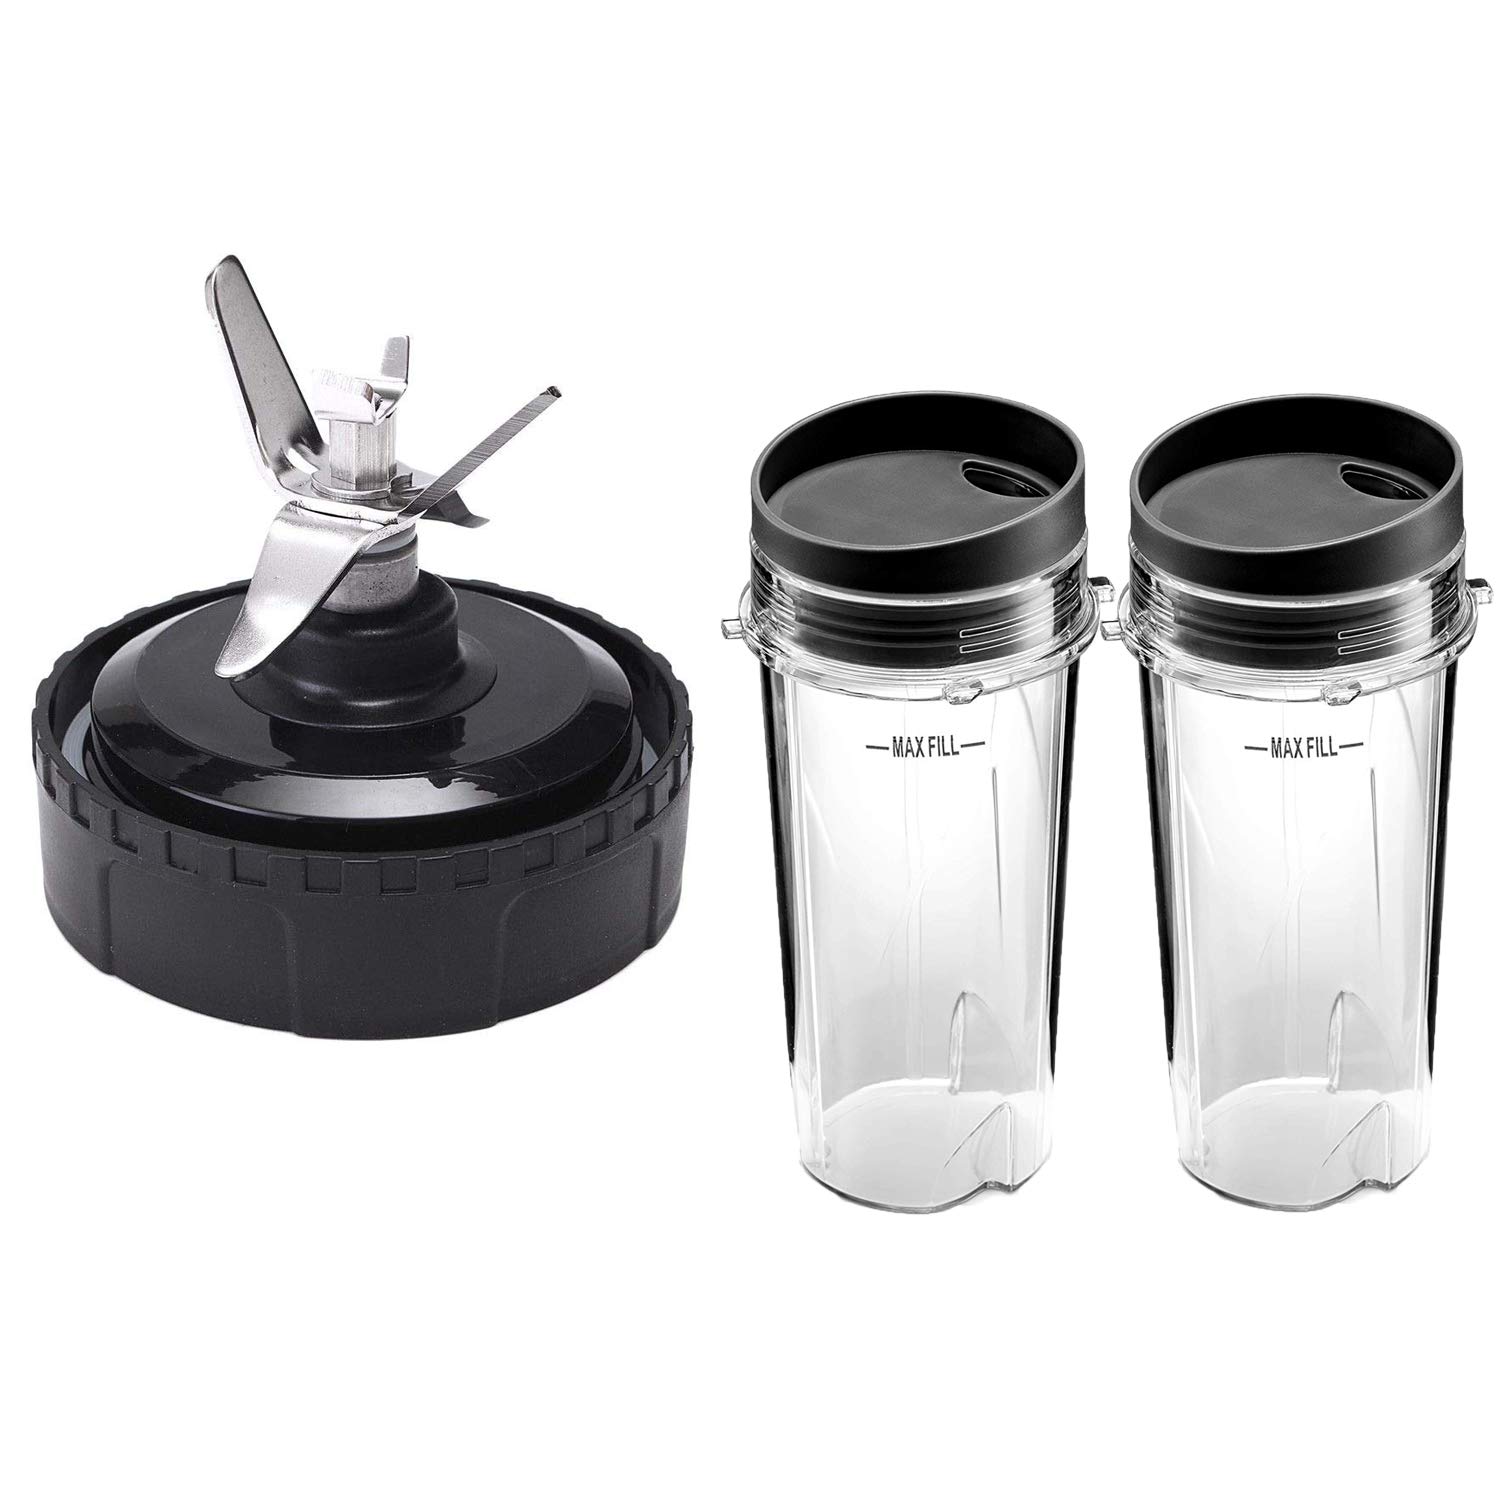 10 Best Ninja Blender Replacement Parts for 2023